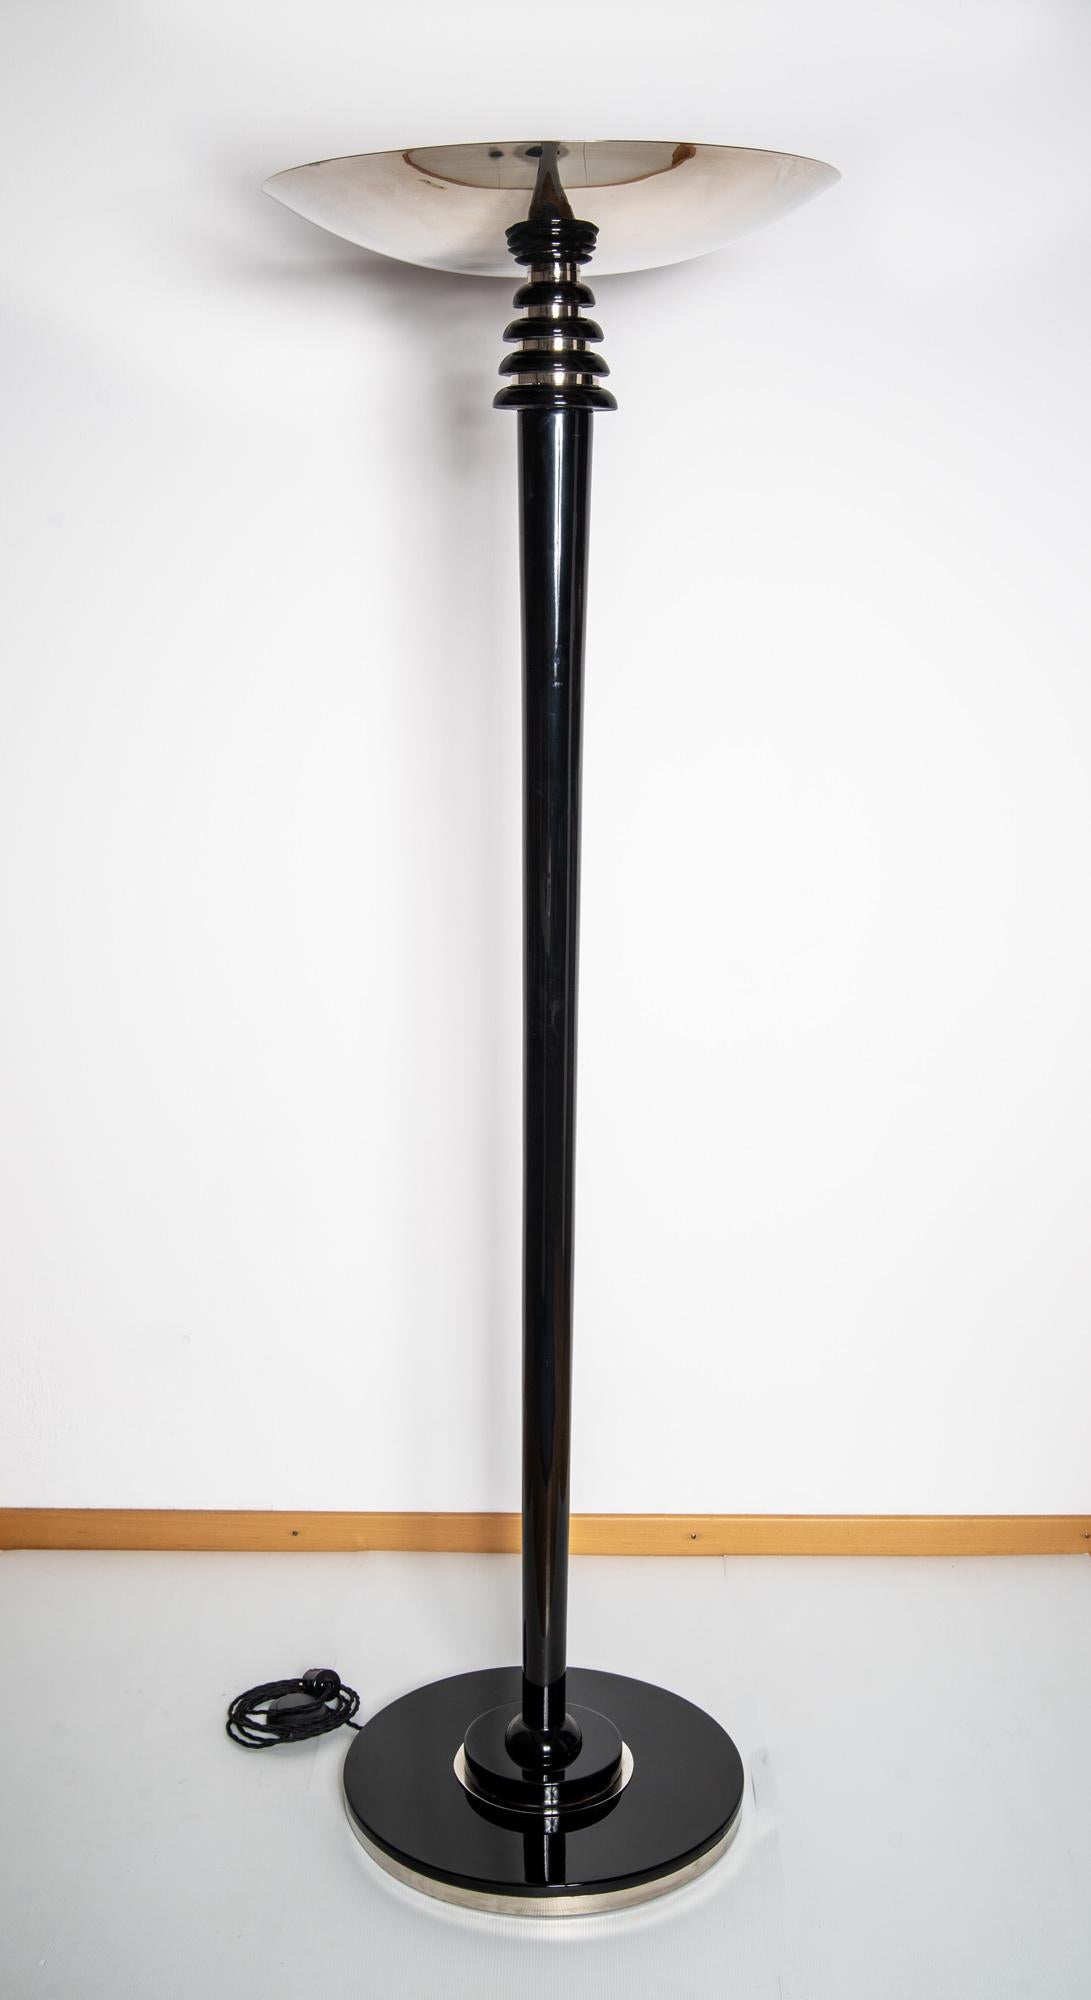 Original Art Deco floor lamp from Paris, circa 1930-1940

Greatly restored condition.
Wood: Black piano lacquer coated and polished.
Polished and nickel-plated brass fittings.
Newly electrified, LED based, dimmable.